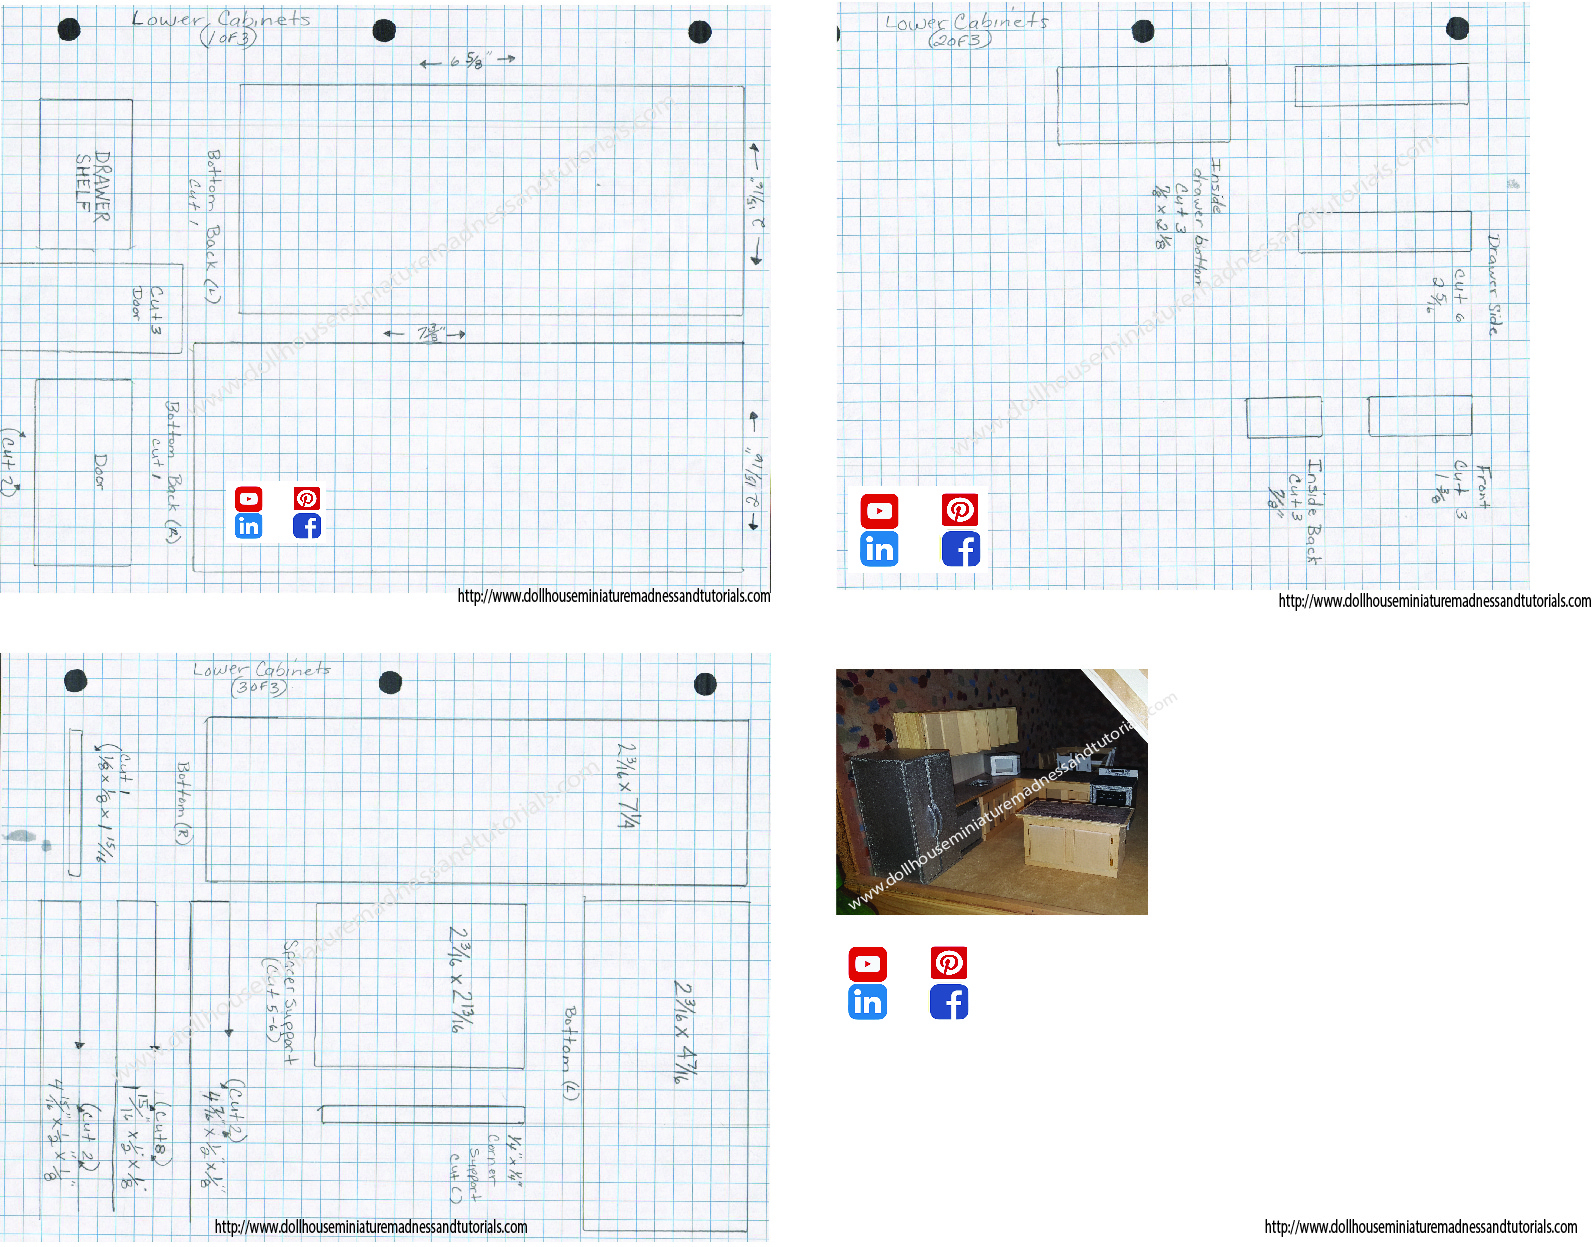 Templates - Dollhouse Miniature Madness And Tutorials - Free Printable Dollhouse Furniture Patterns